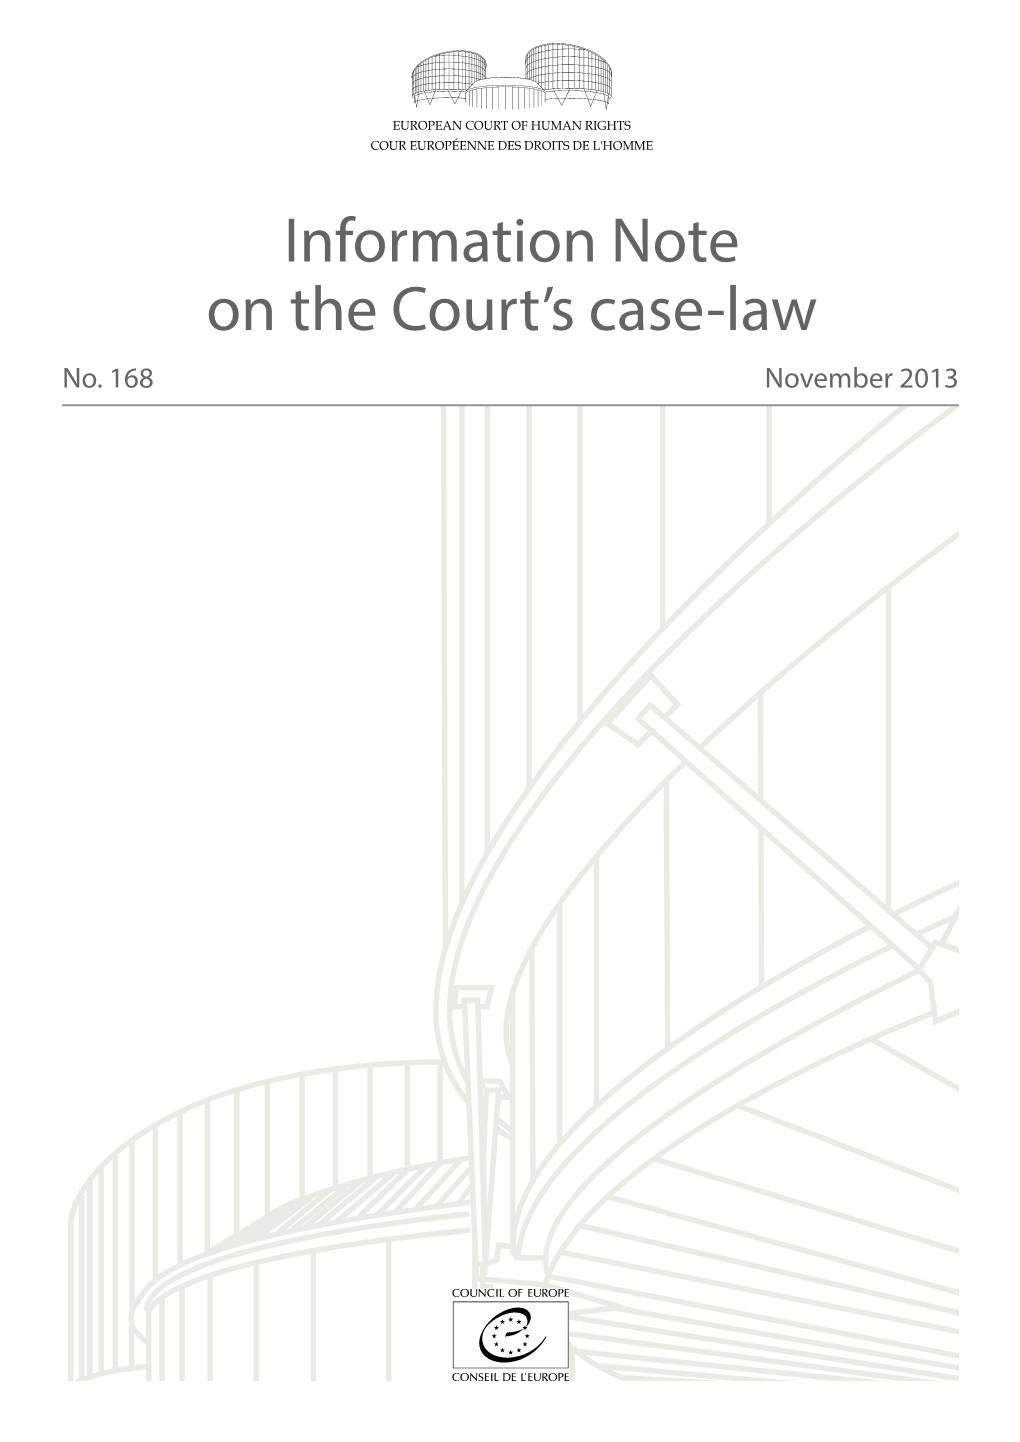 Information Note on the Court's Case-Law No. 168 (November 2013)